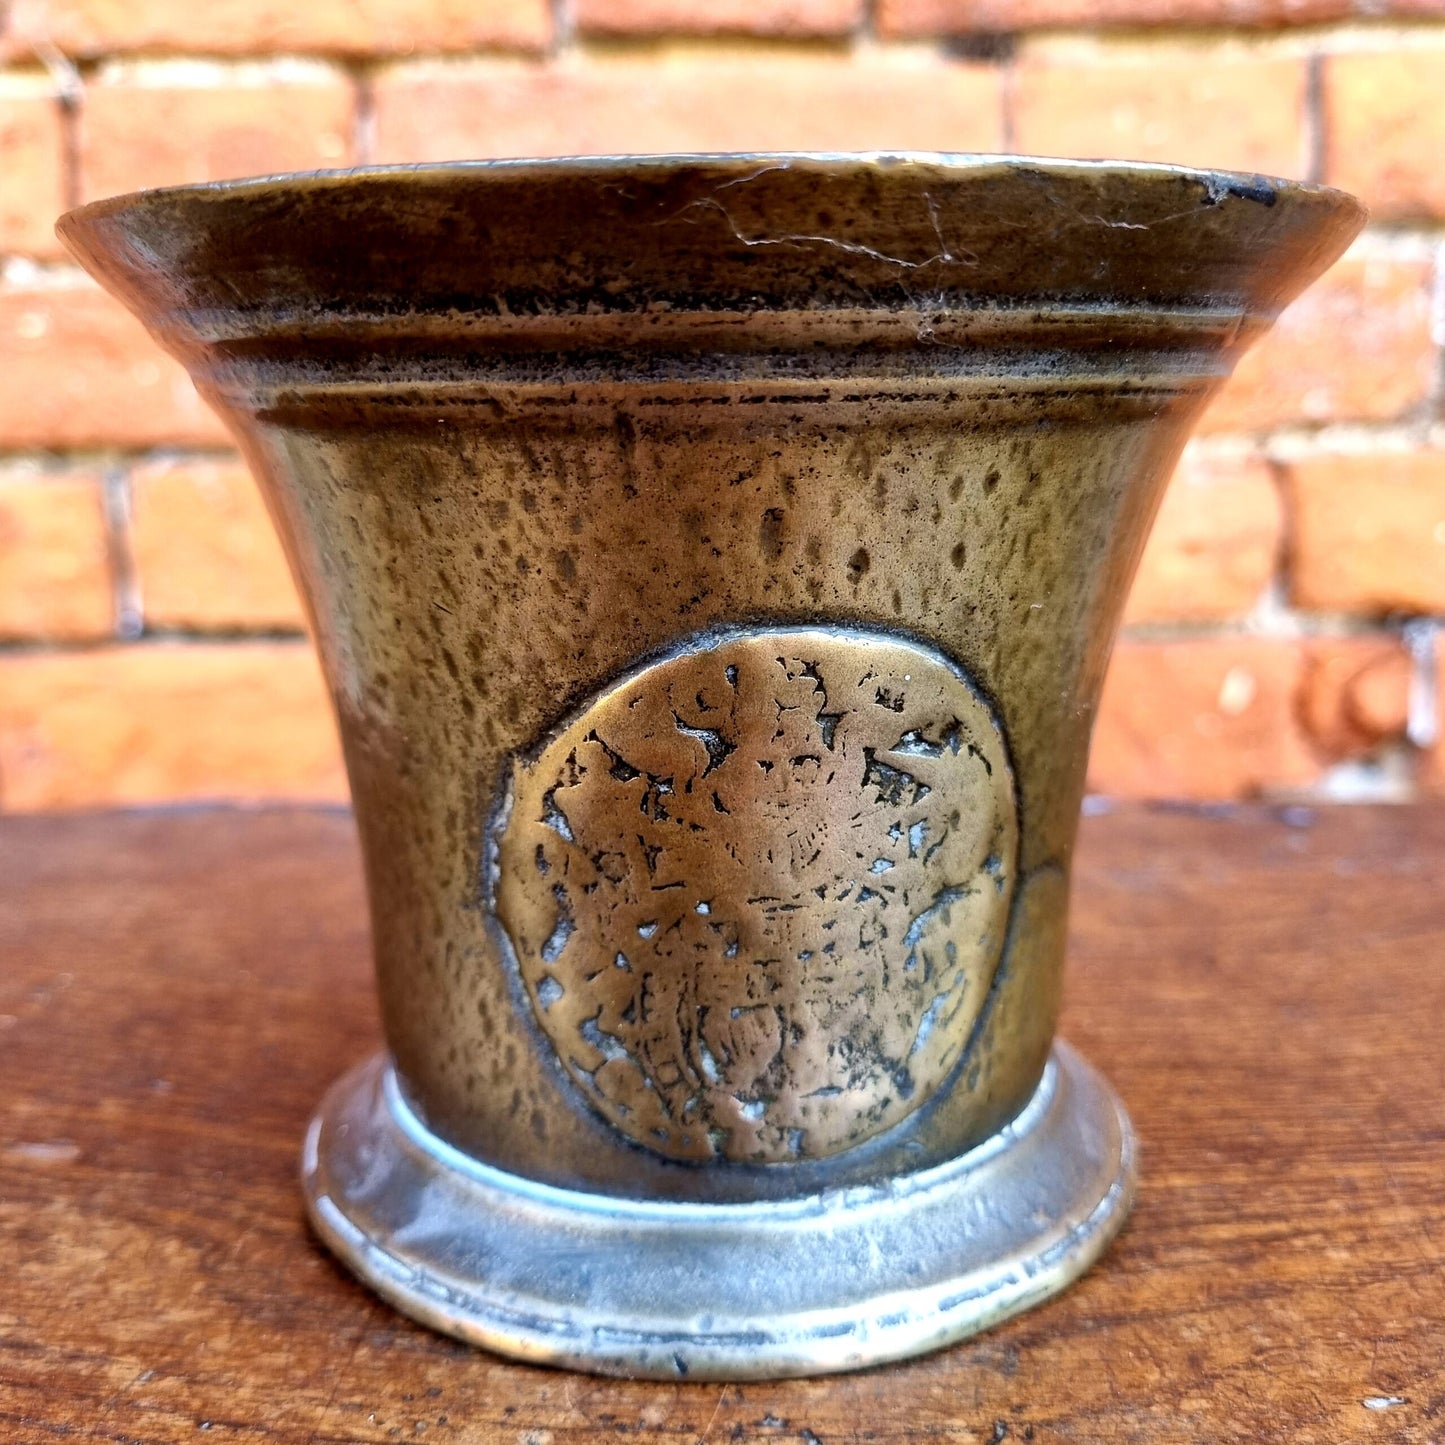 Early 17th Century English Antique Bronze Mortar, by Abraham Rudhall (1684-1718), of Gloucestershire